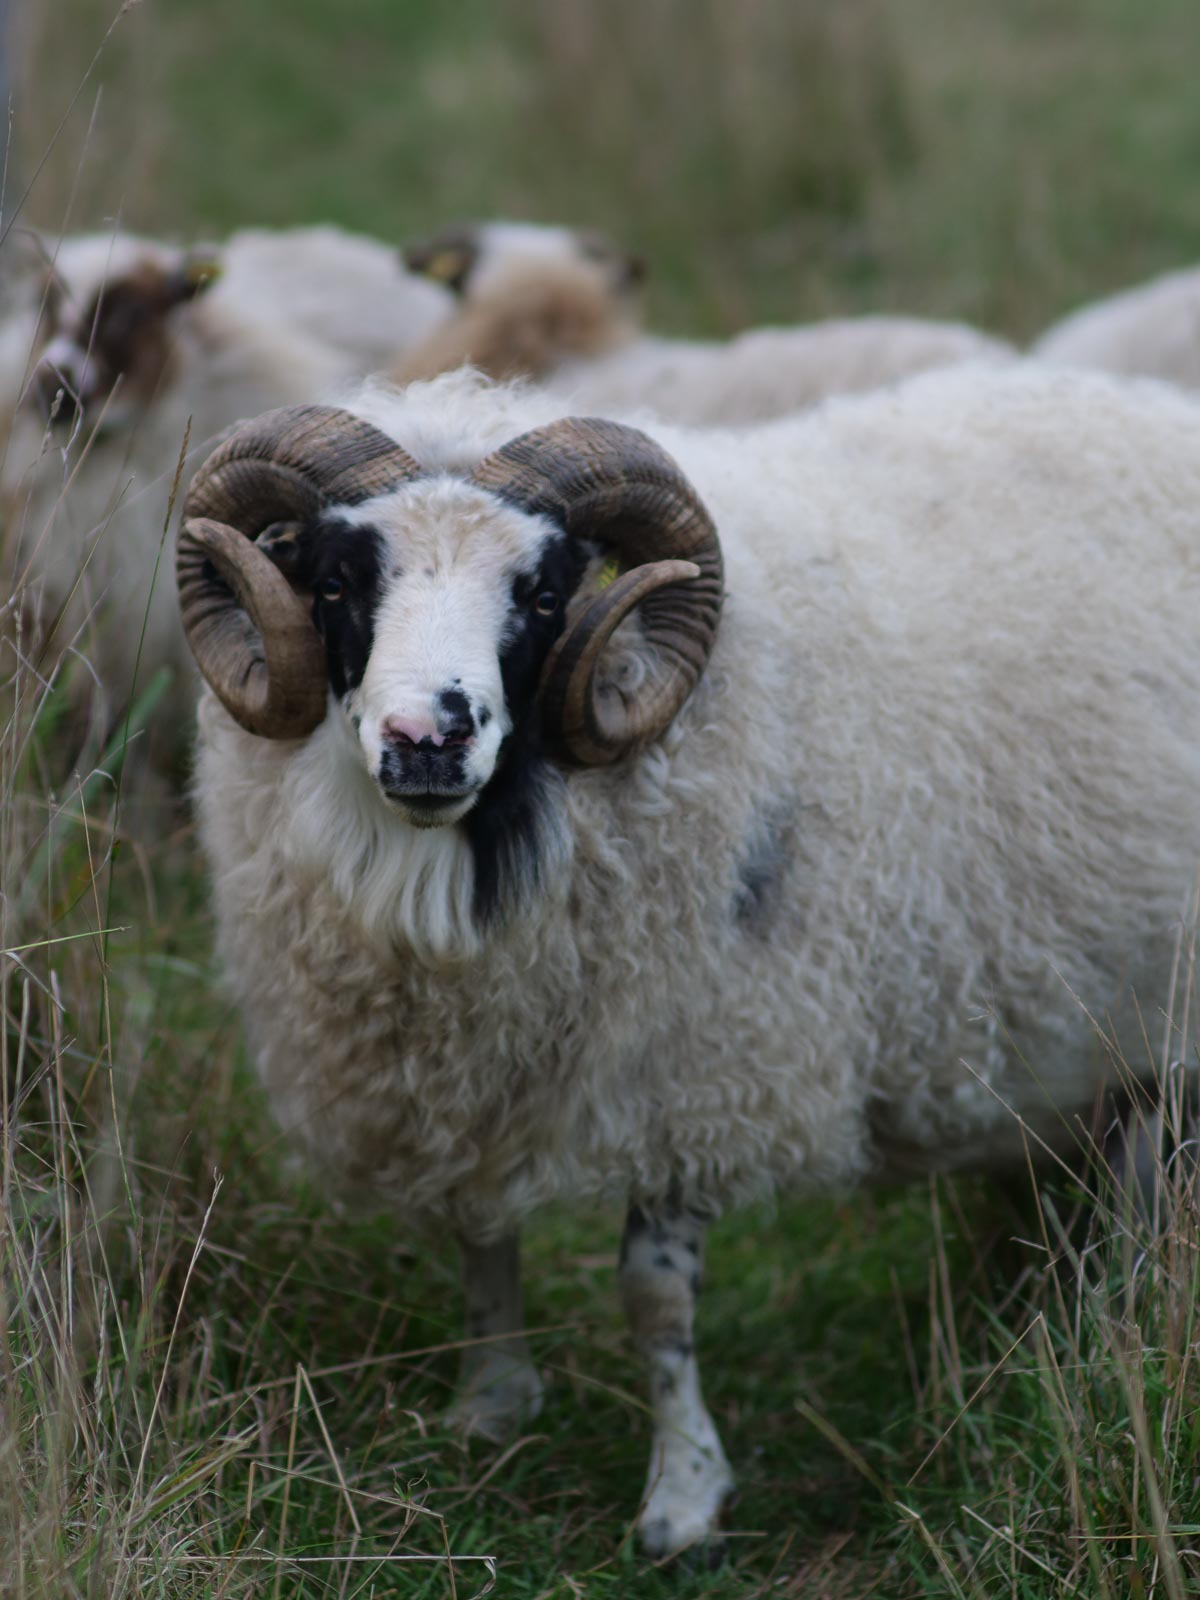 A large Icelandic ram with white wool and massive, curled horns stands in a pasture.